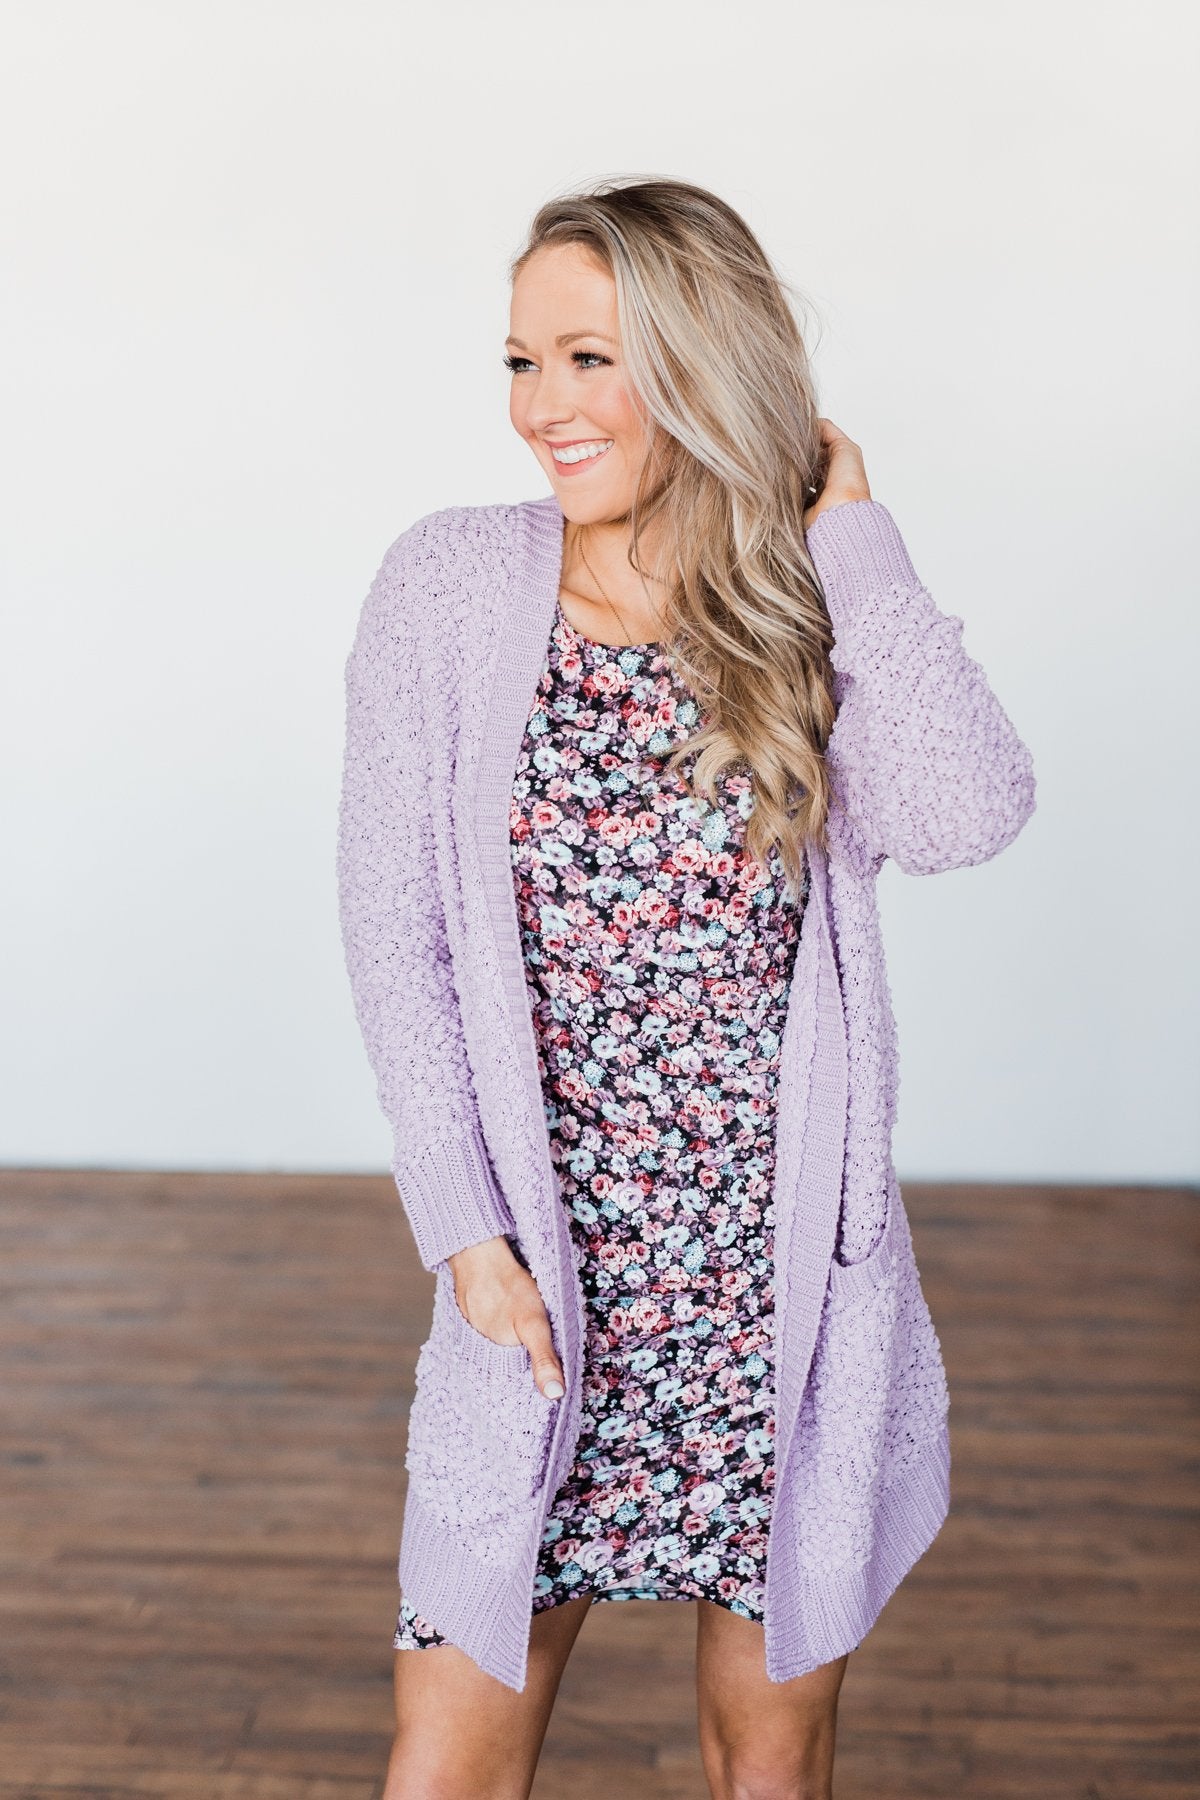 Show You Around Floral Dress- Pink & Purple Tones